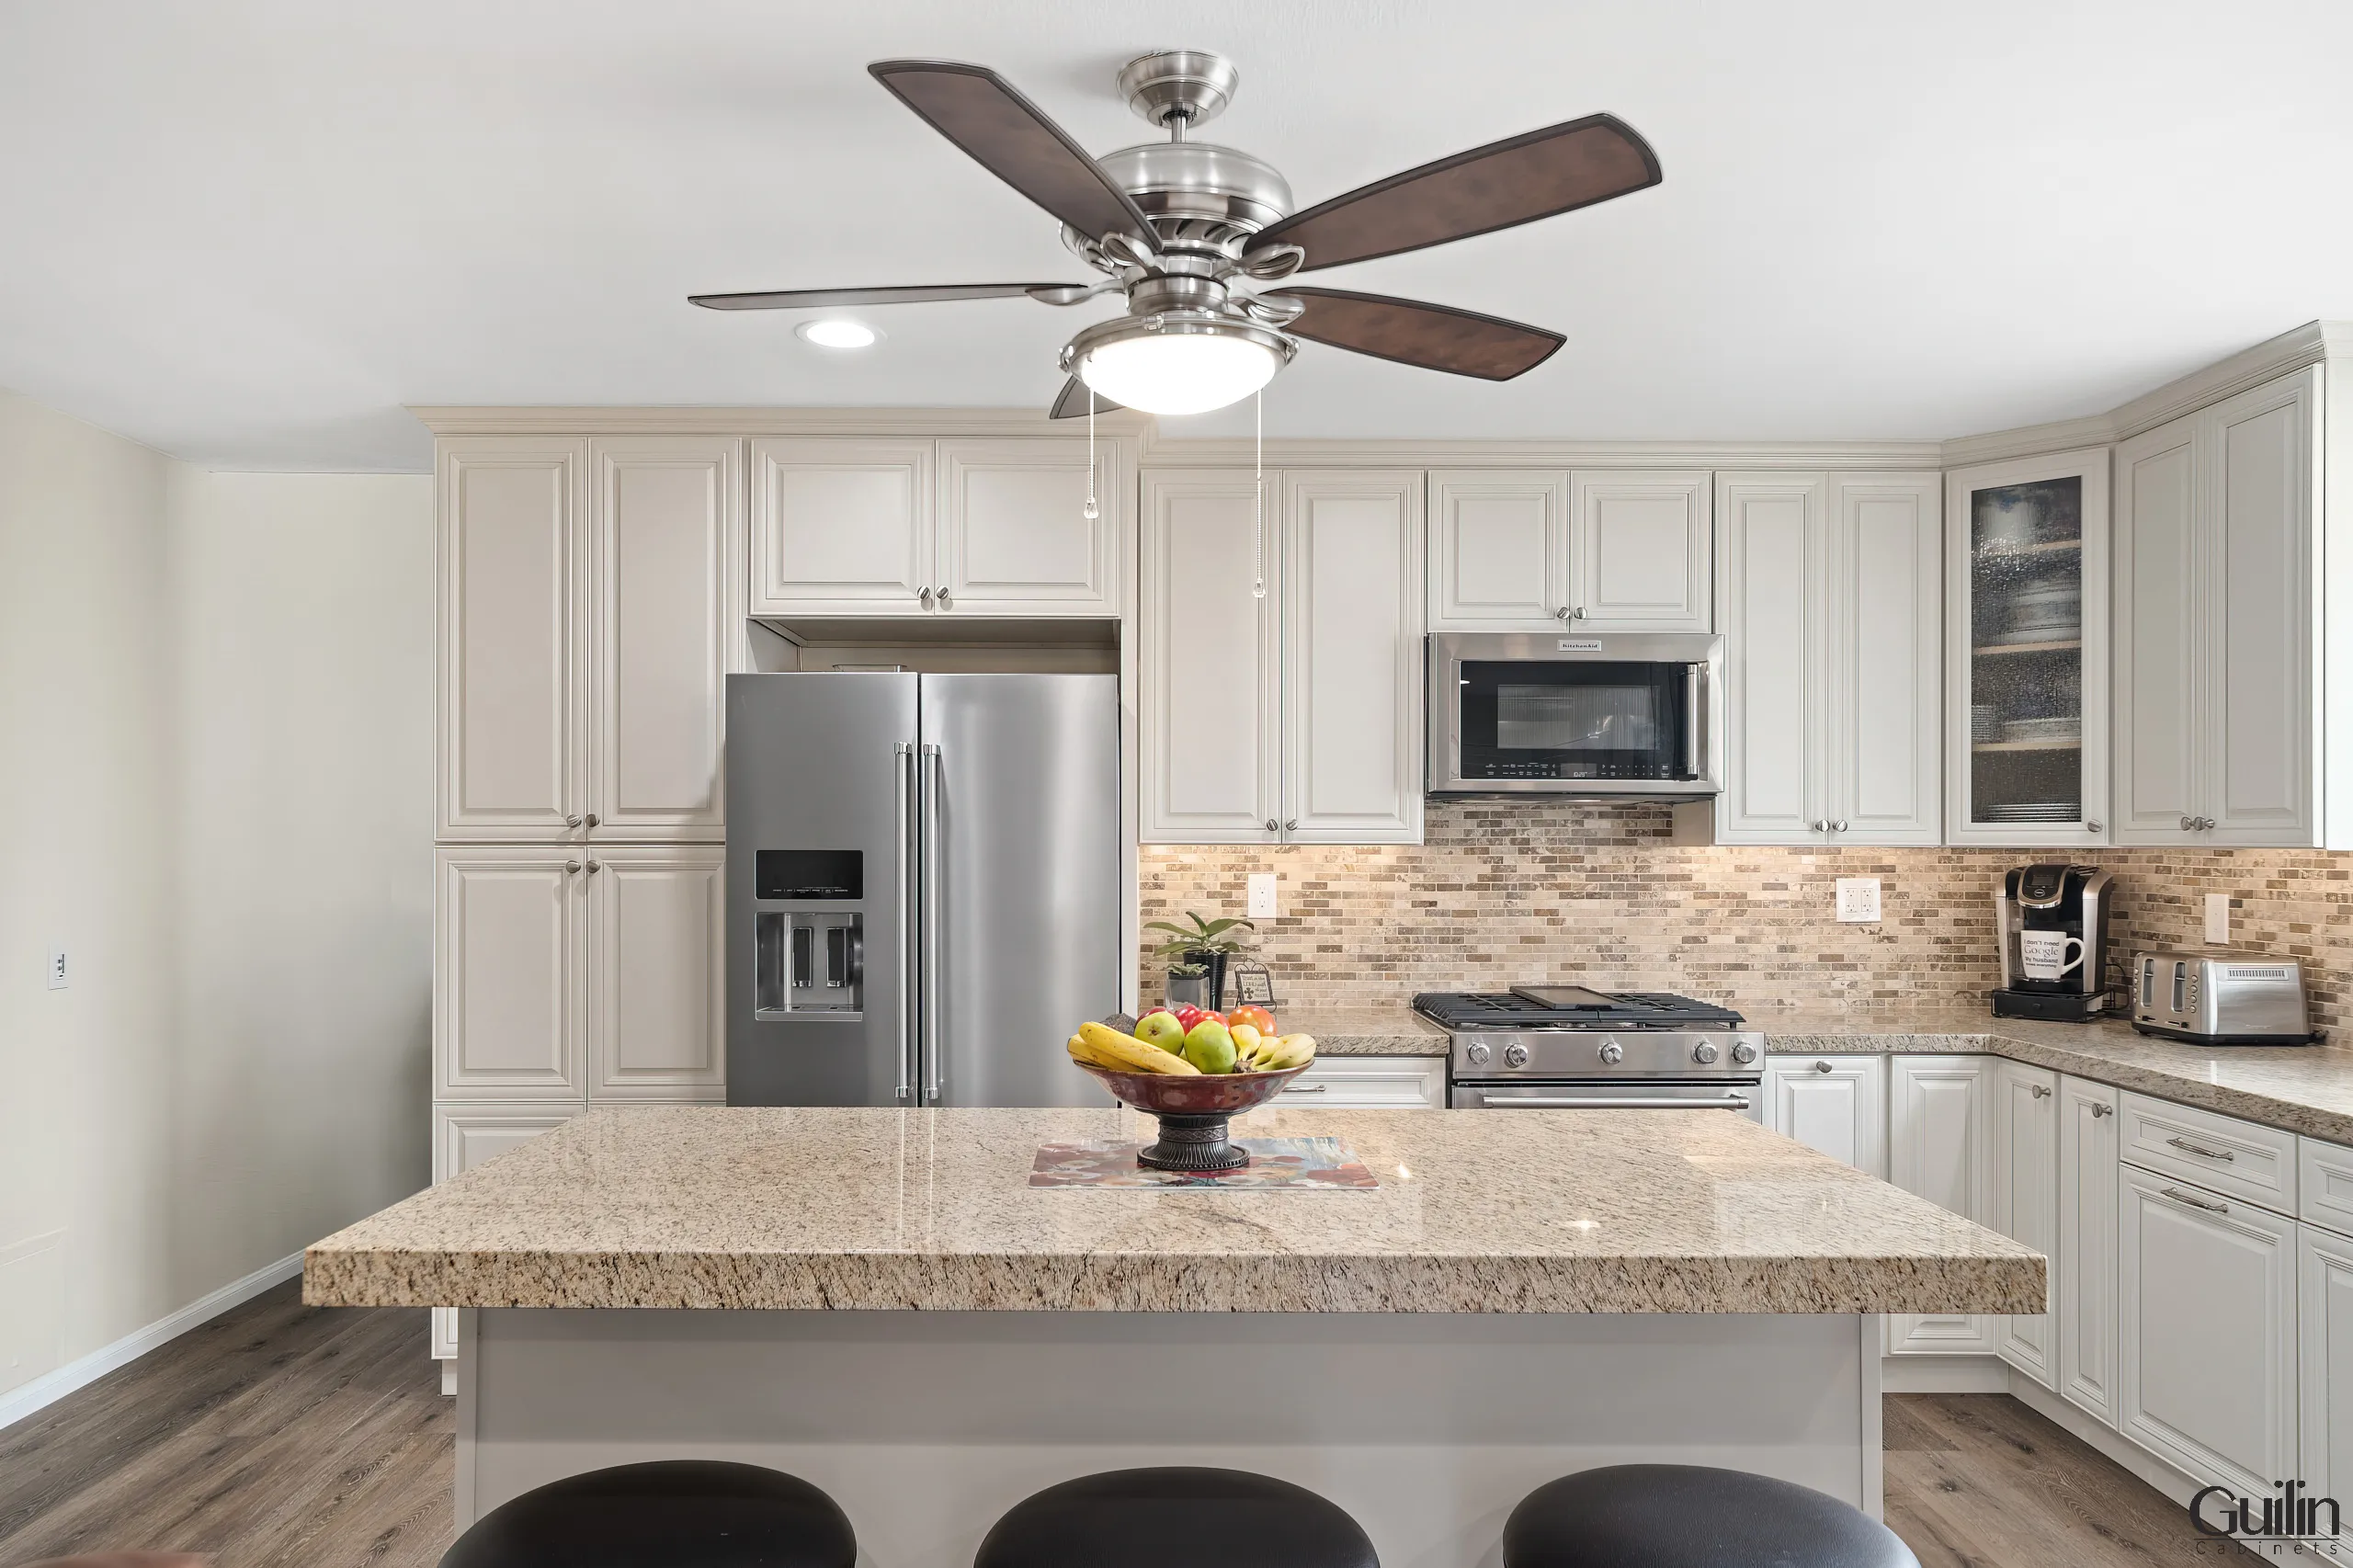 Tradition Kitchen remodeled by Guilin Cabinets in Orange County CA 11